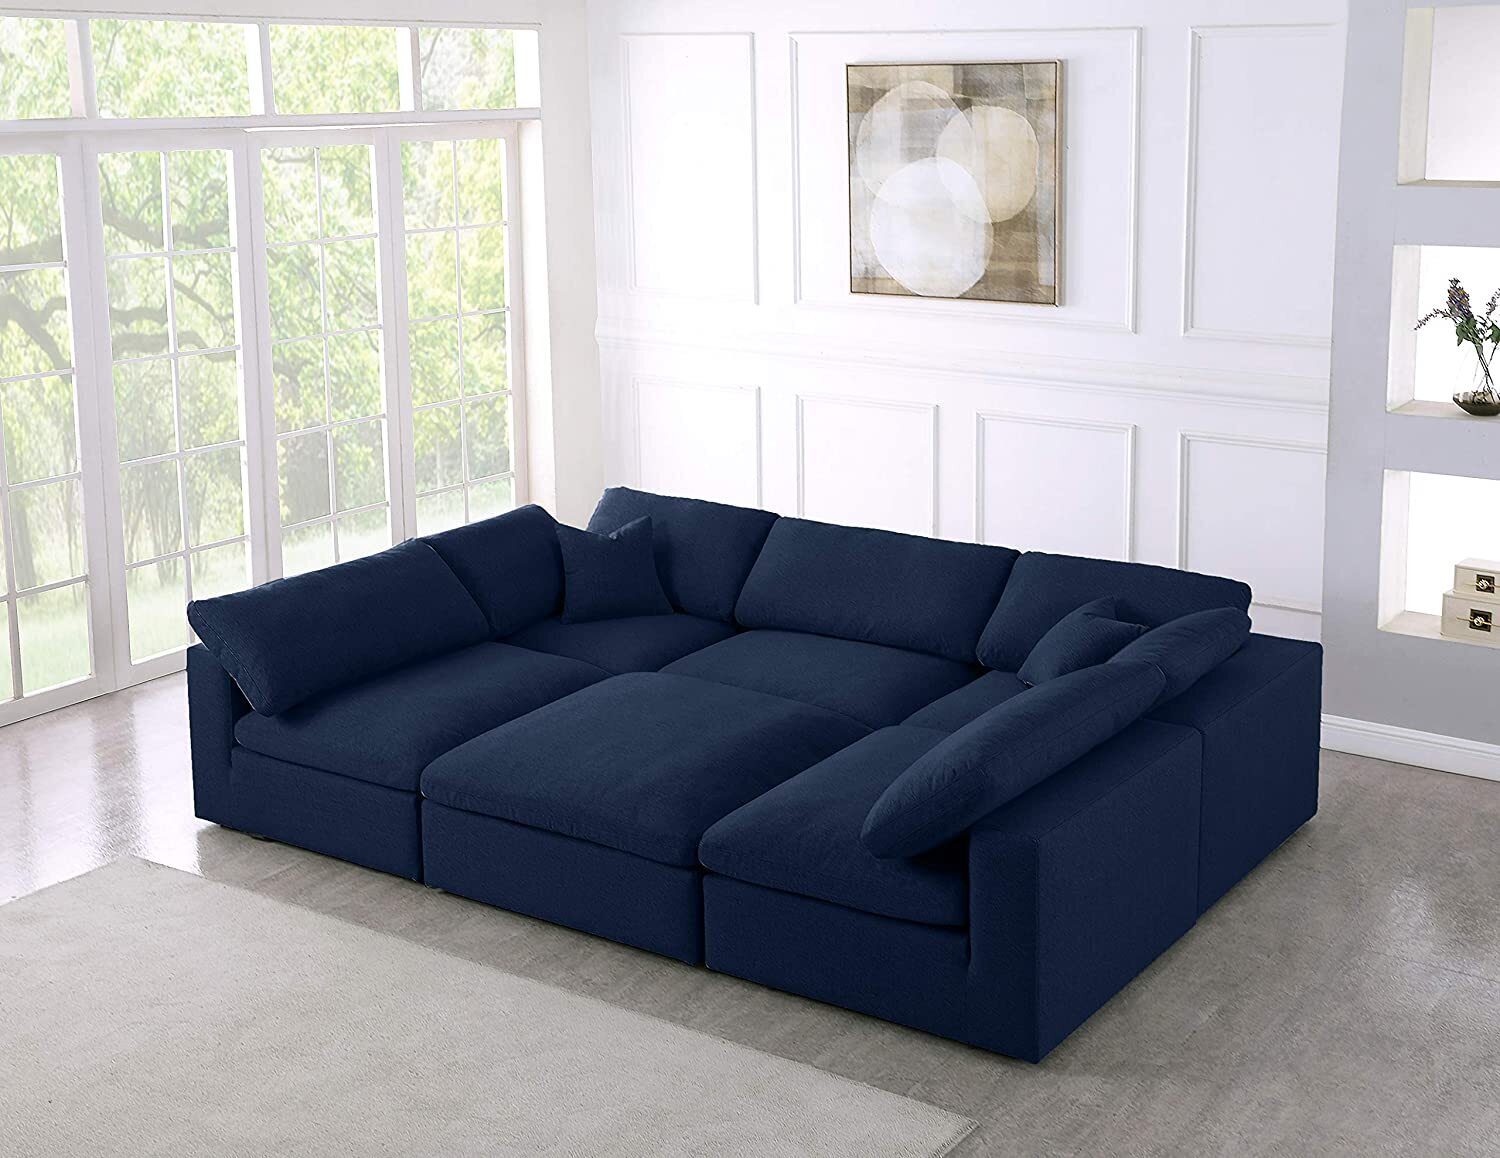 Soft 6 Piece Sectional Sofa Bed With Big Ottoman For The Middle 